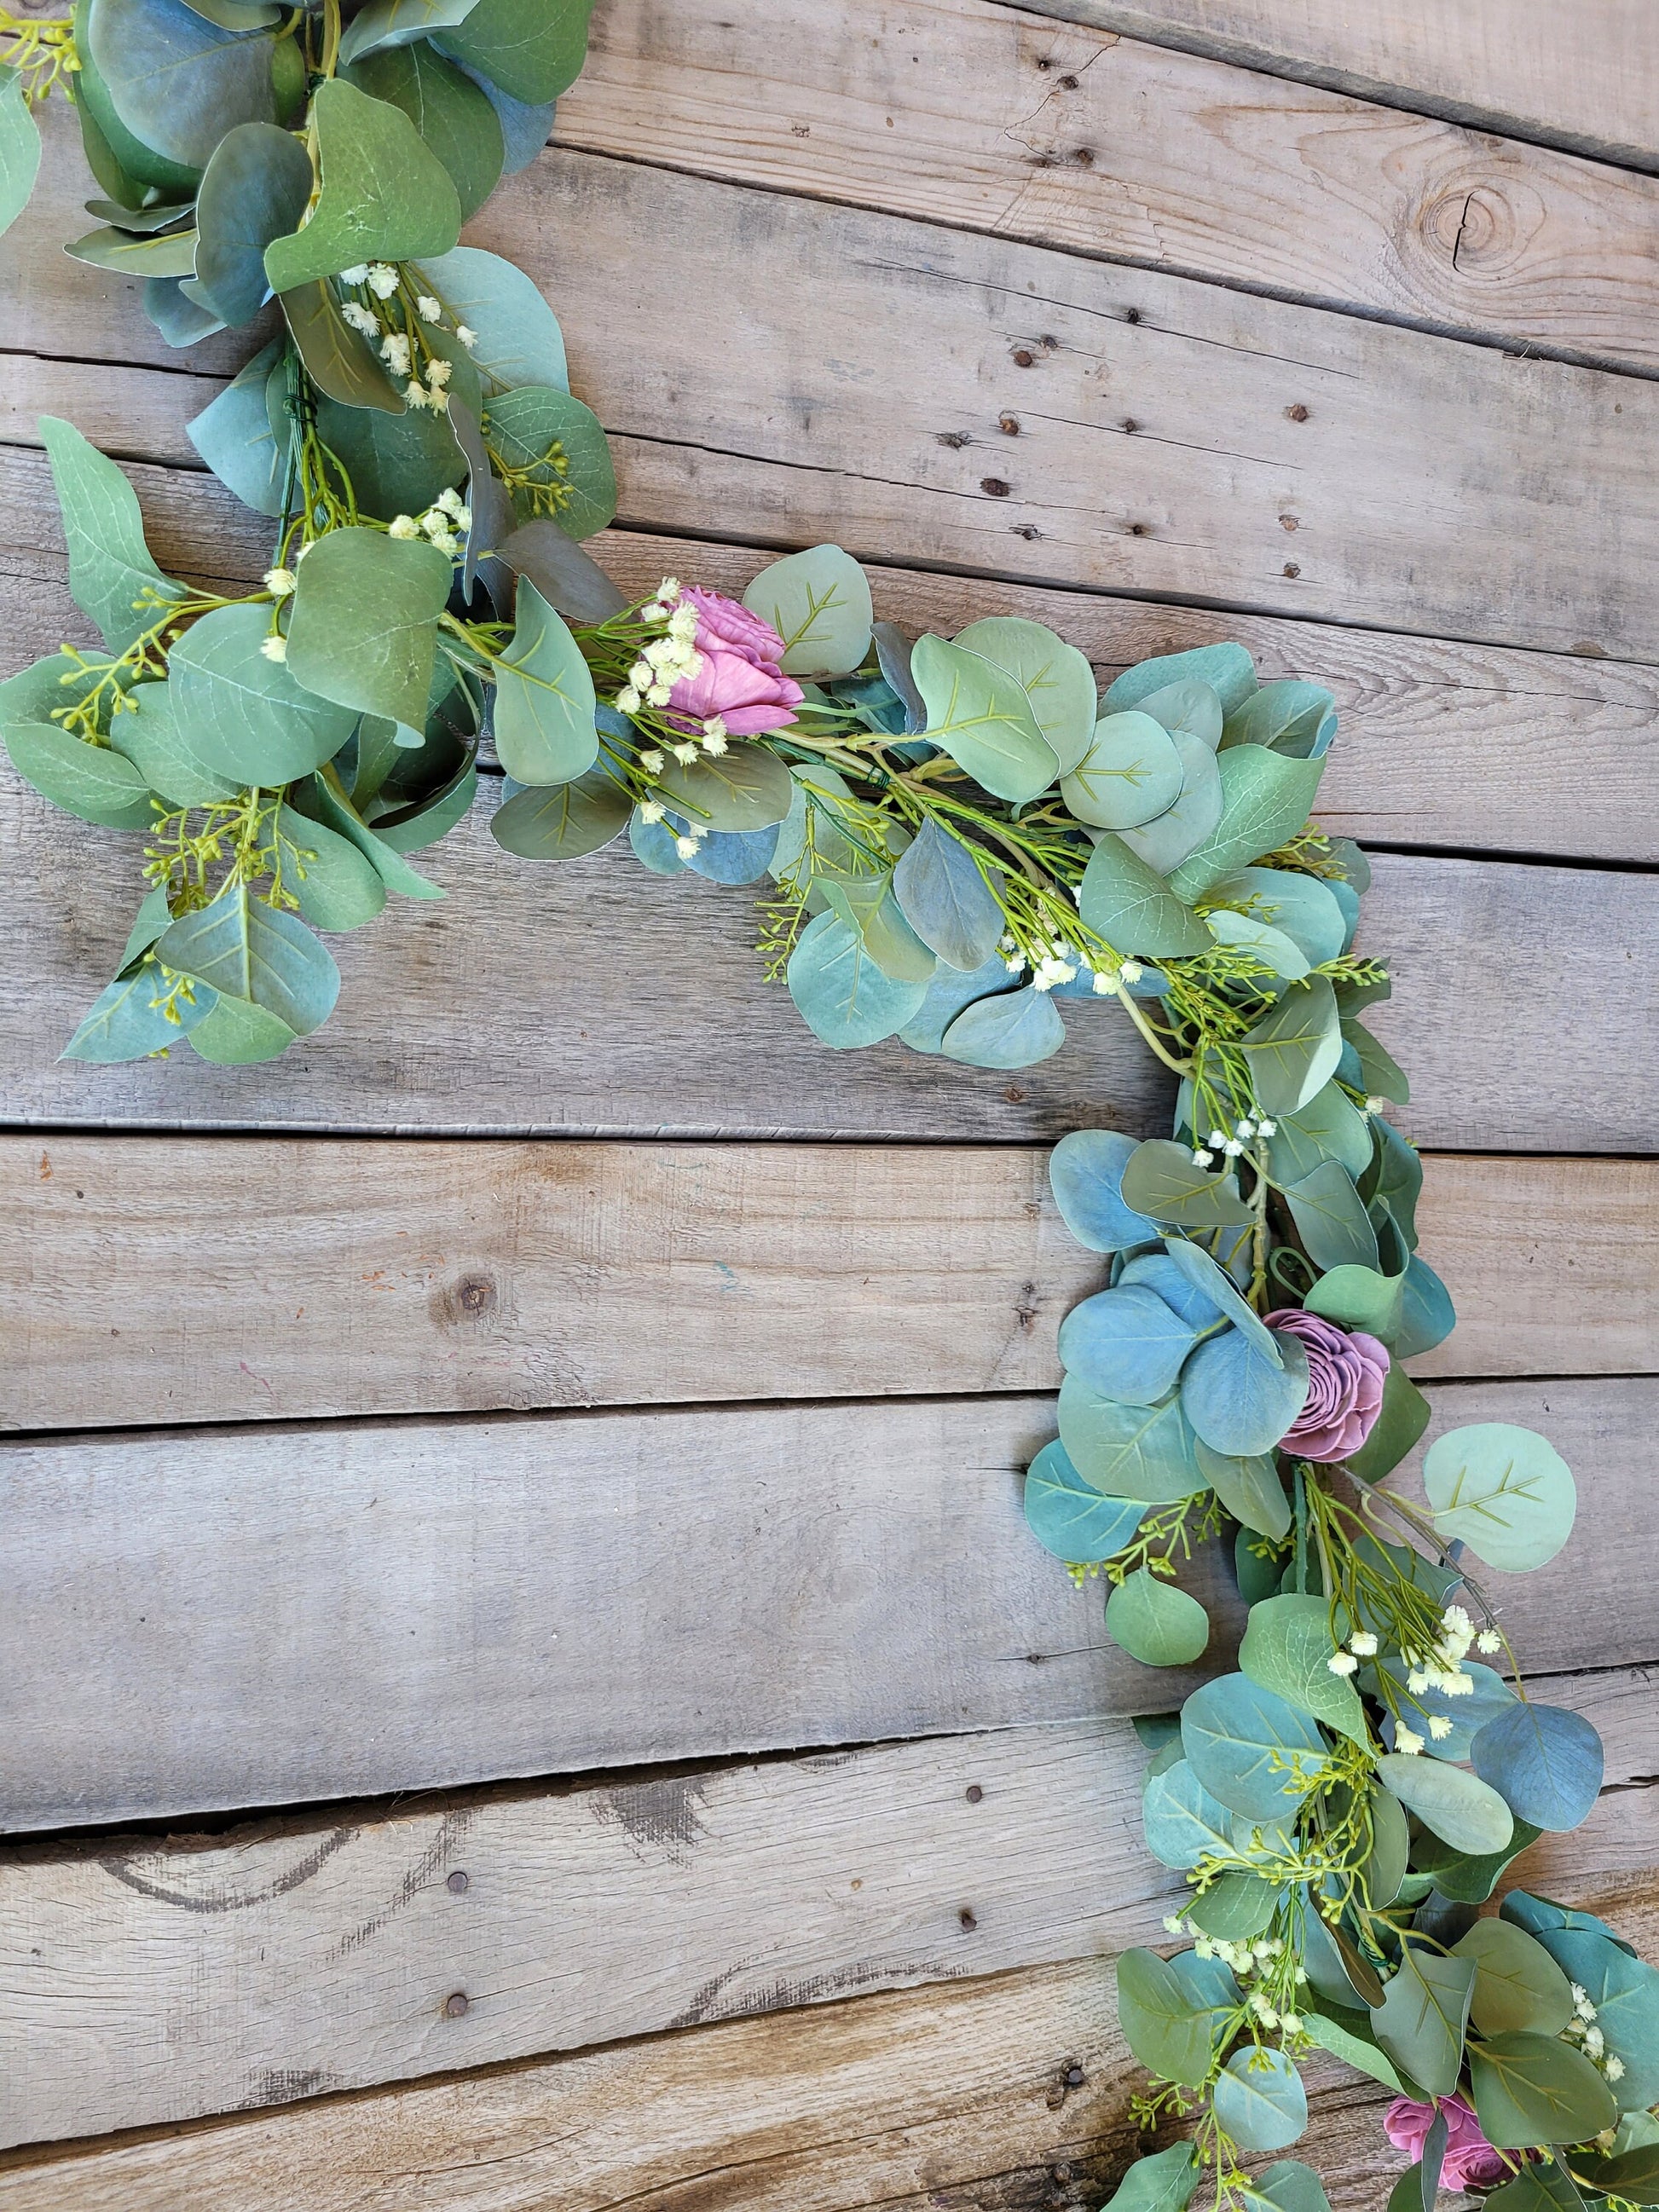 Silver Dollar Eucalyptus Table Garland with Wood Flowers and Baby's Breath, Faux Garland, Wedding Reception Decor, Table Runner